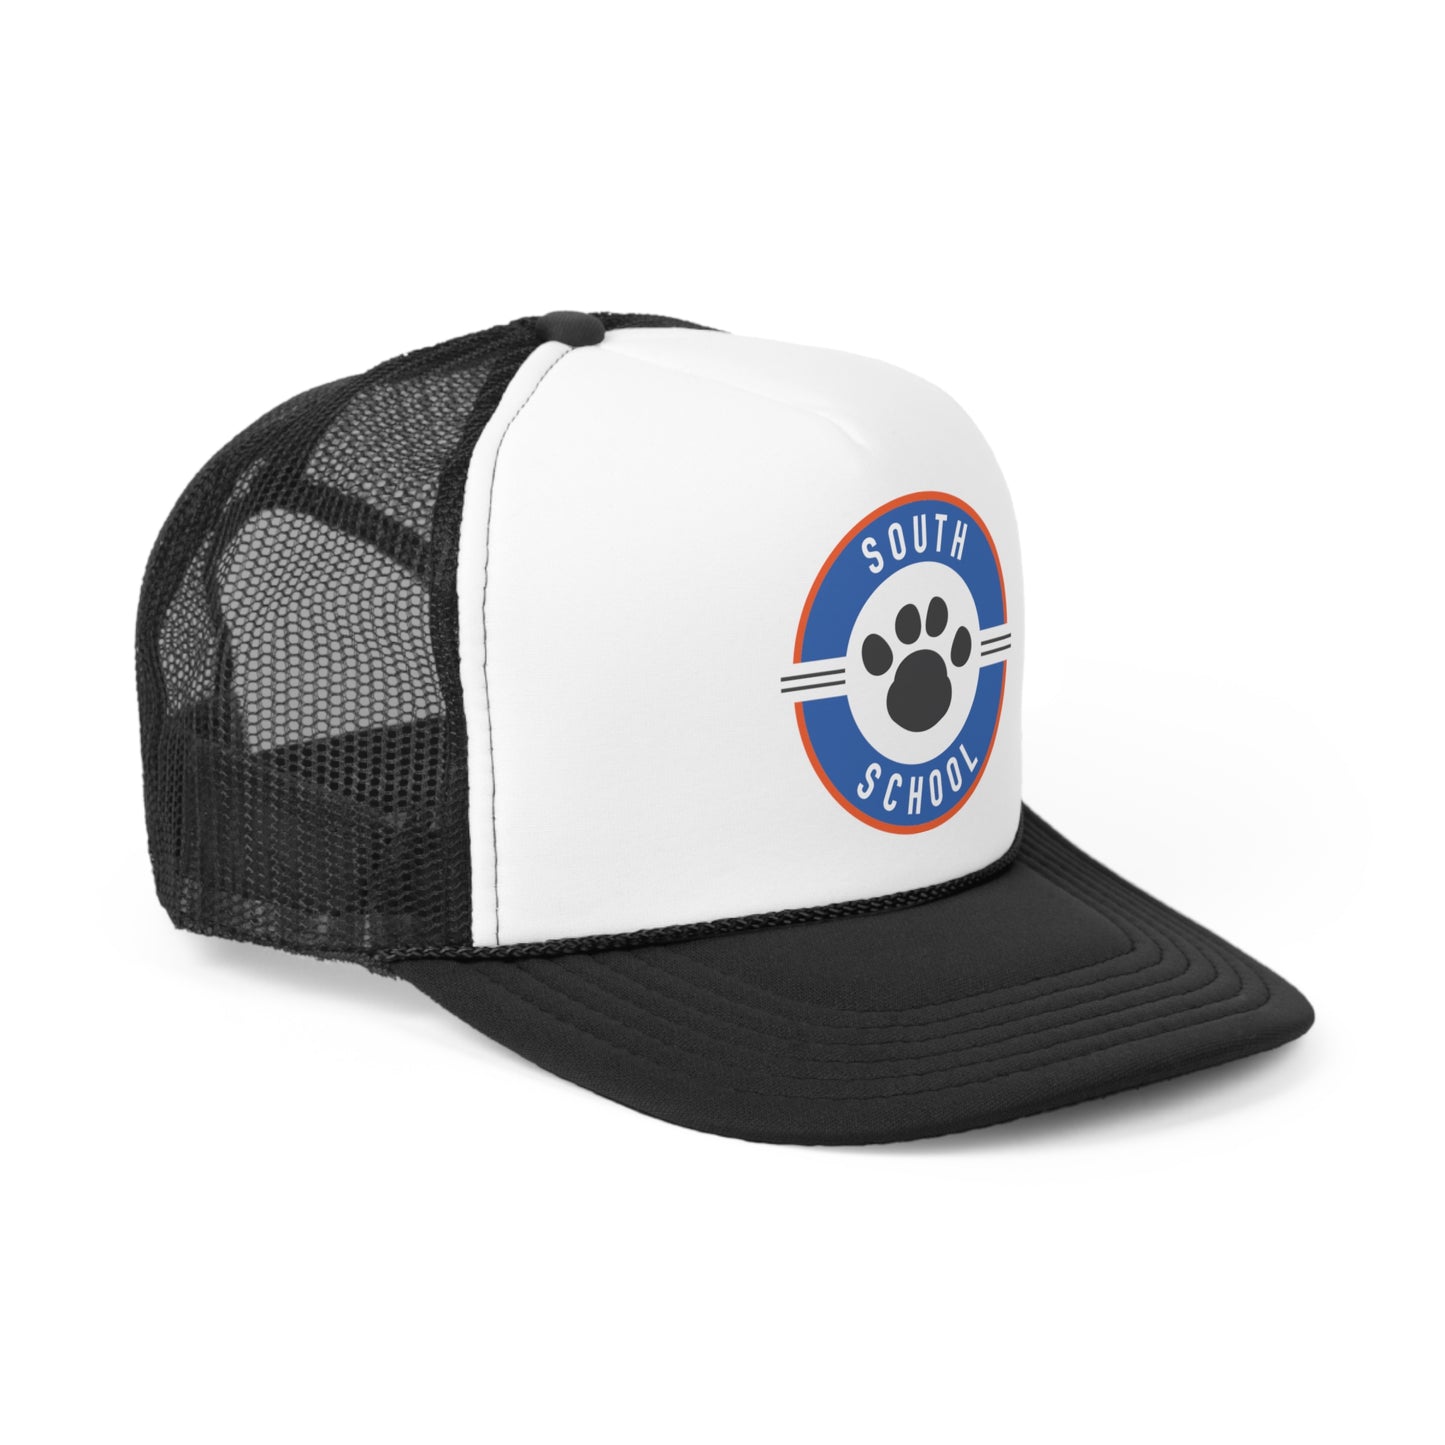 South Tiger Trucker Cap, South Tiger Paw  (Multiple Colors Available)